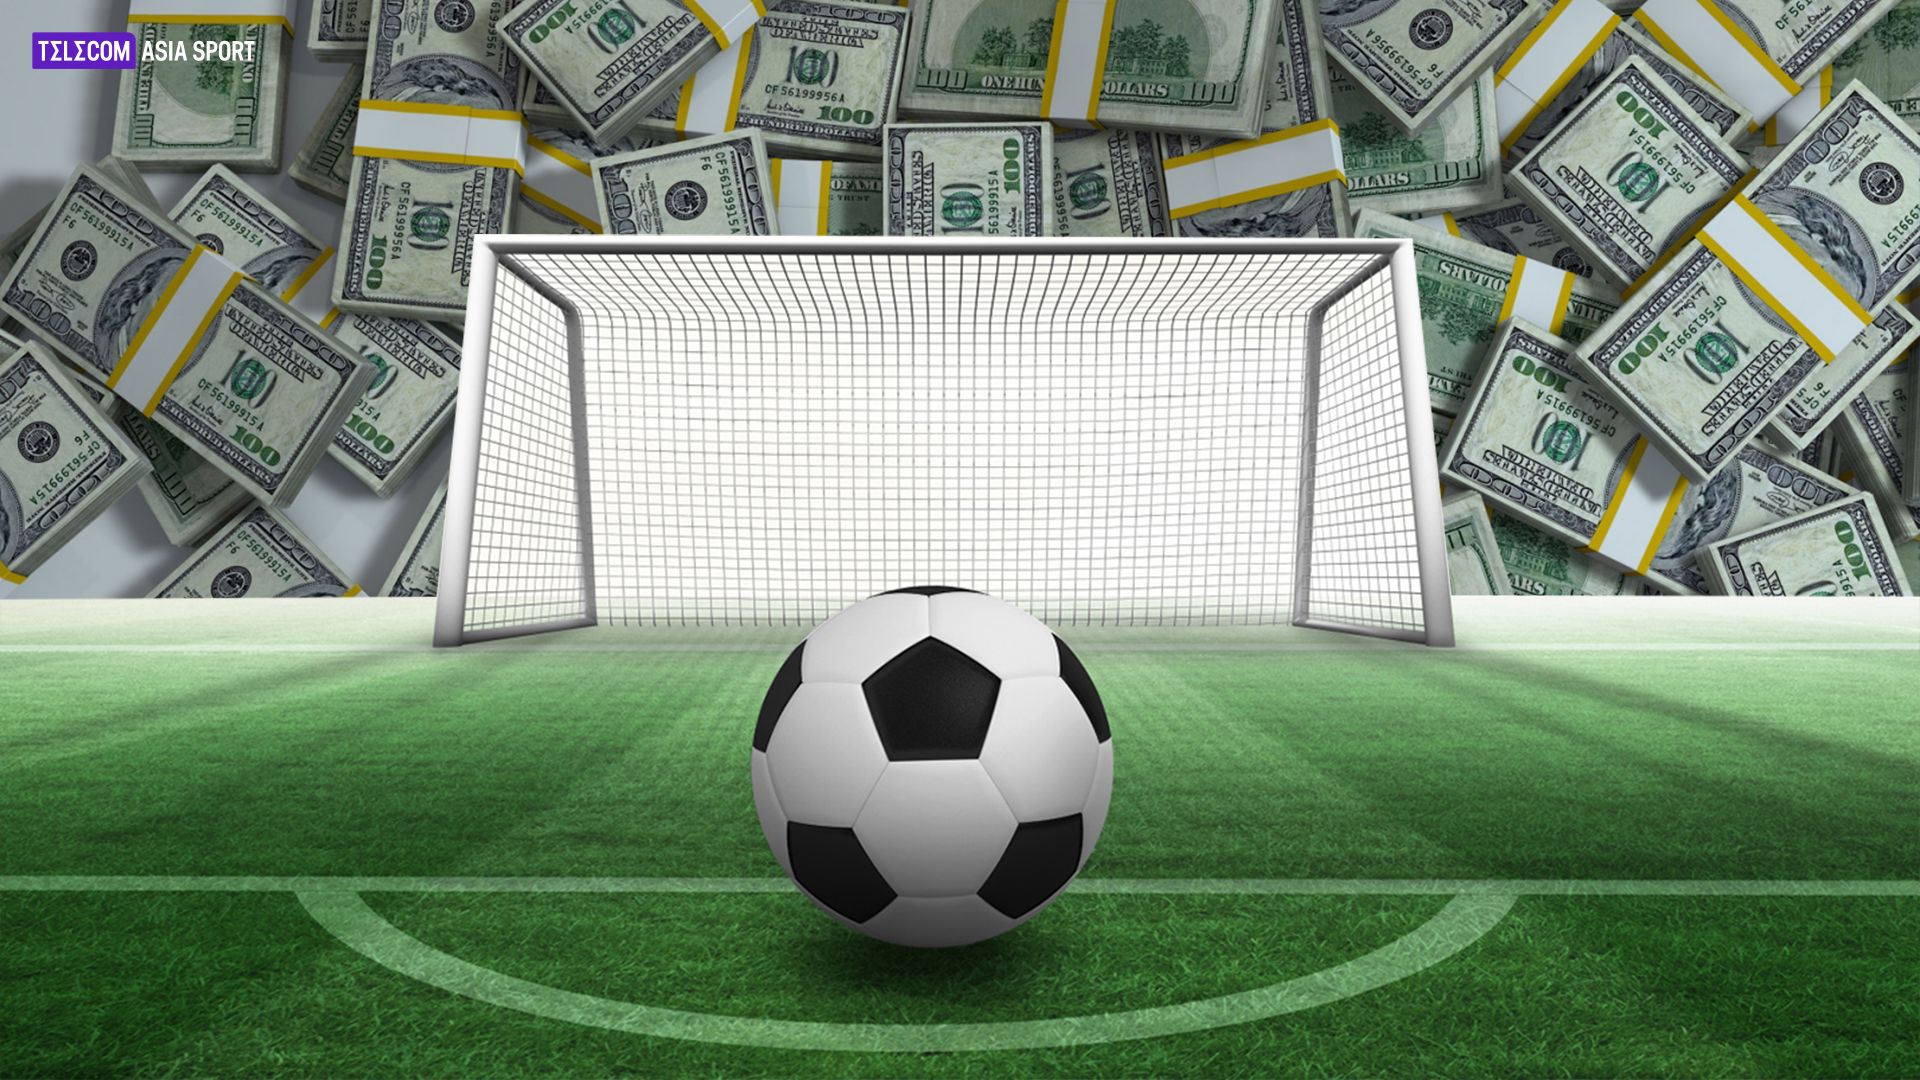 HOW TO BET ON SPORTS - SPORTS BETTING EXPLAINED